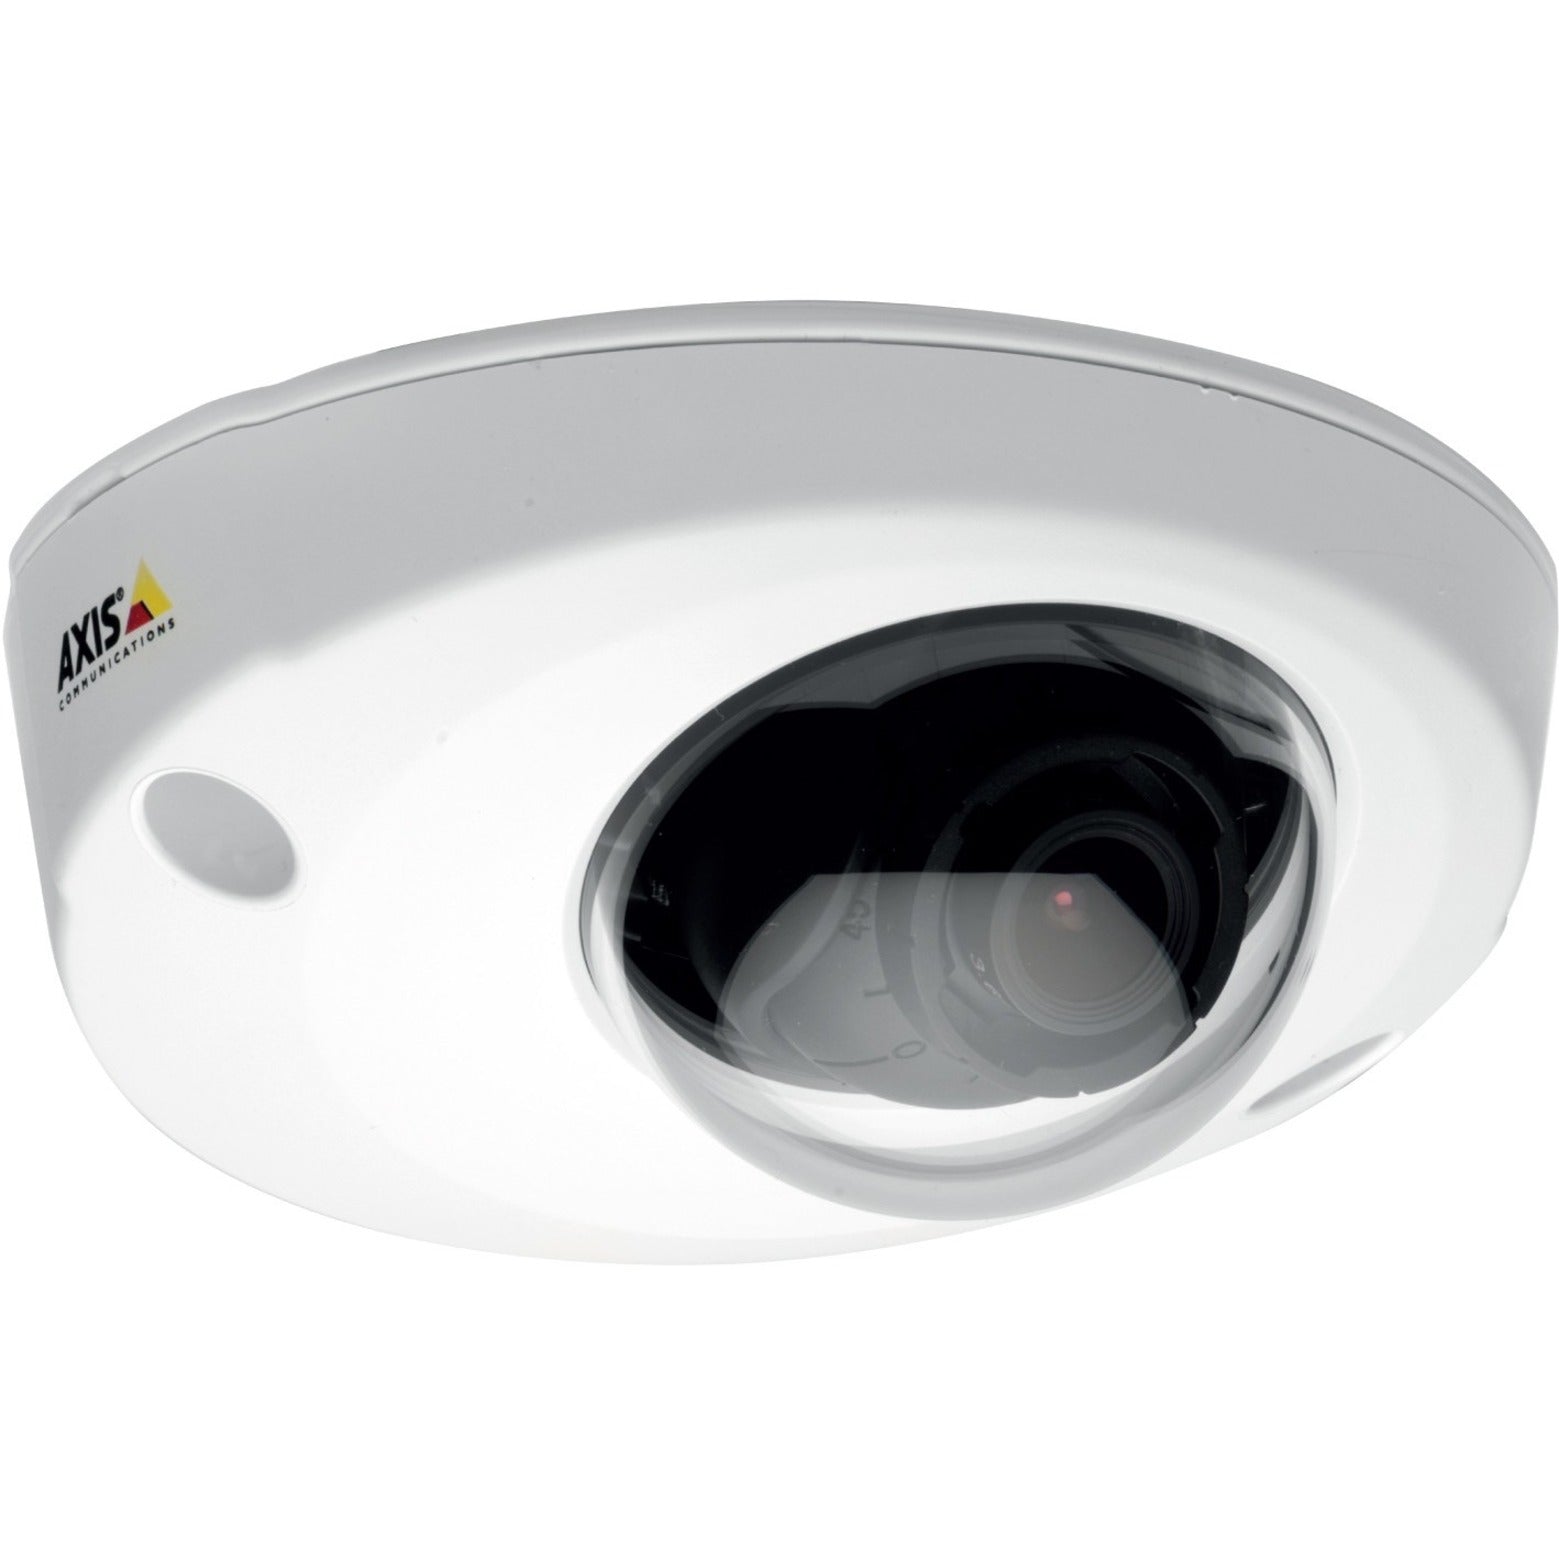 AXIS 01072-001 P3905-R MK II Outdoor Full HD Network Camera, Color Dome, TAA Compliant